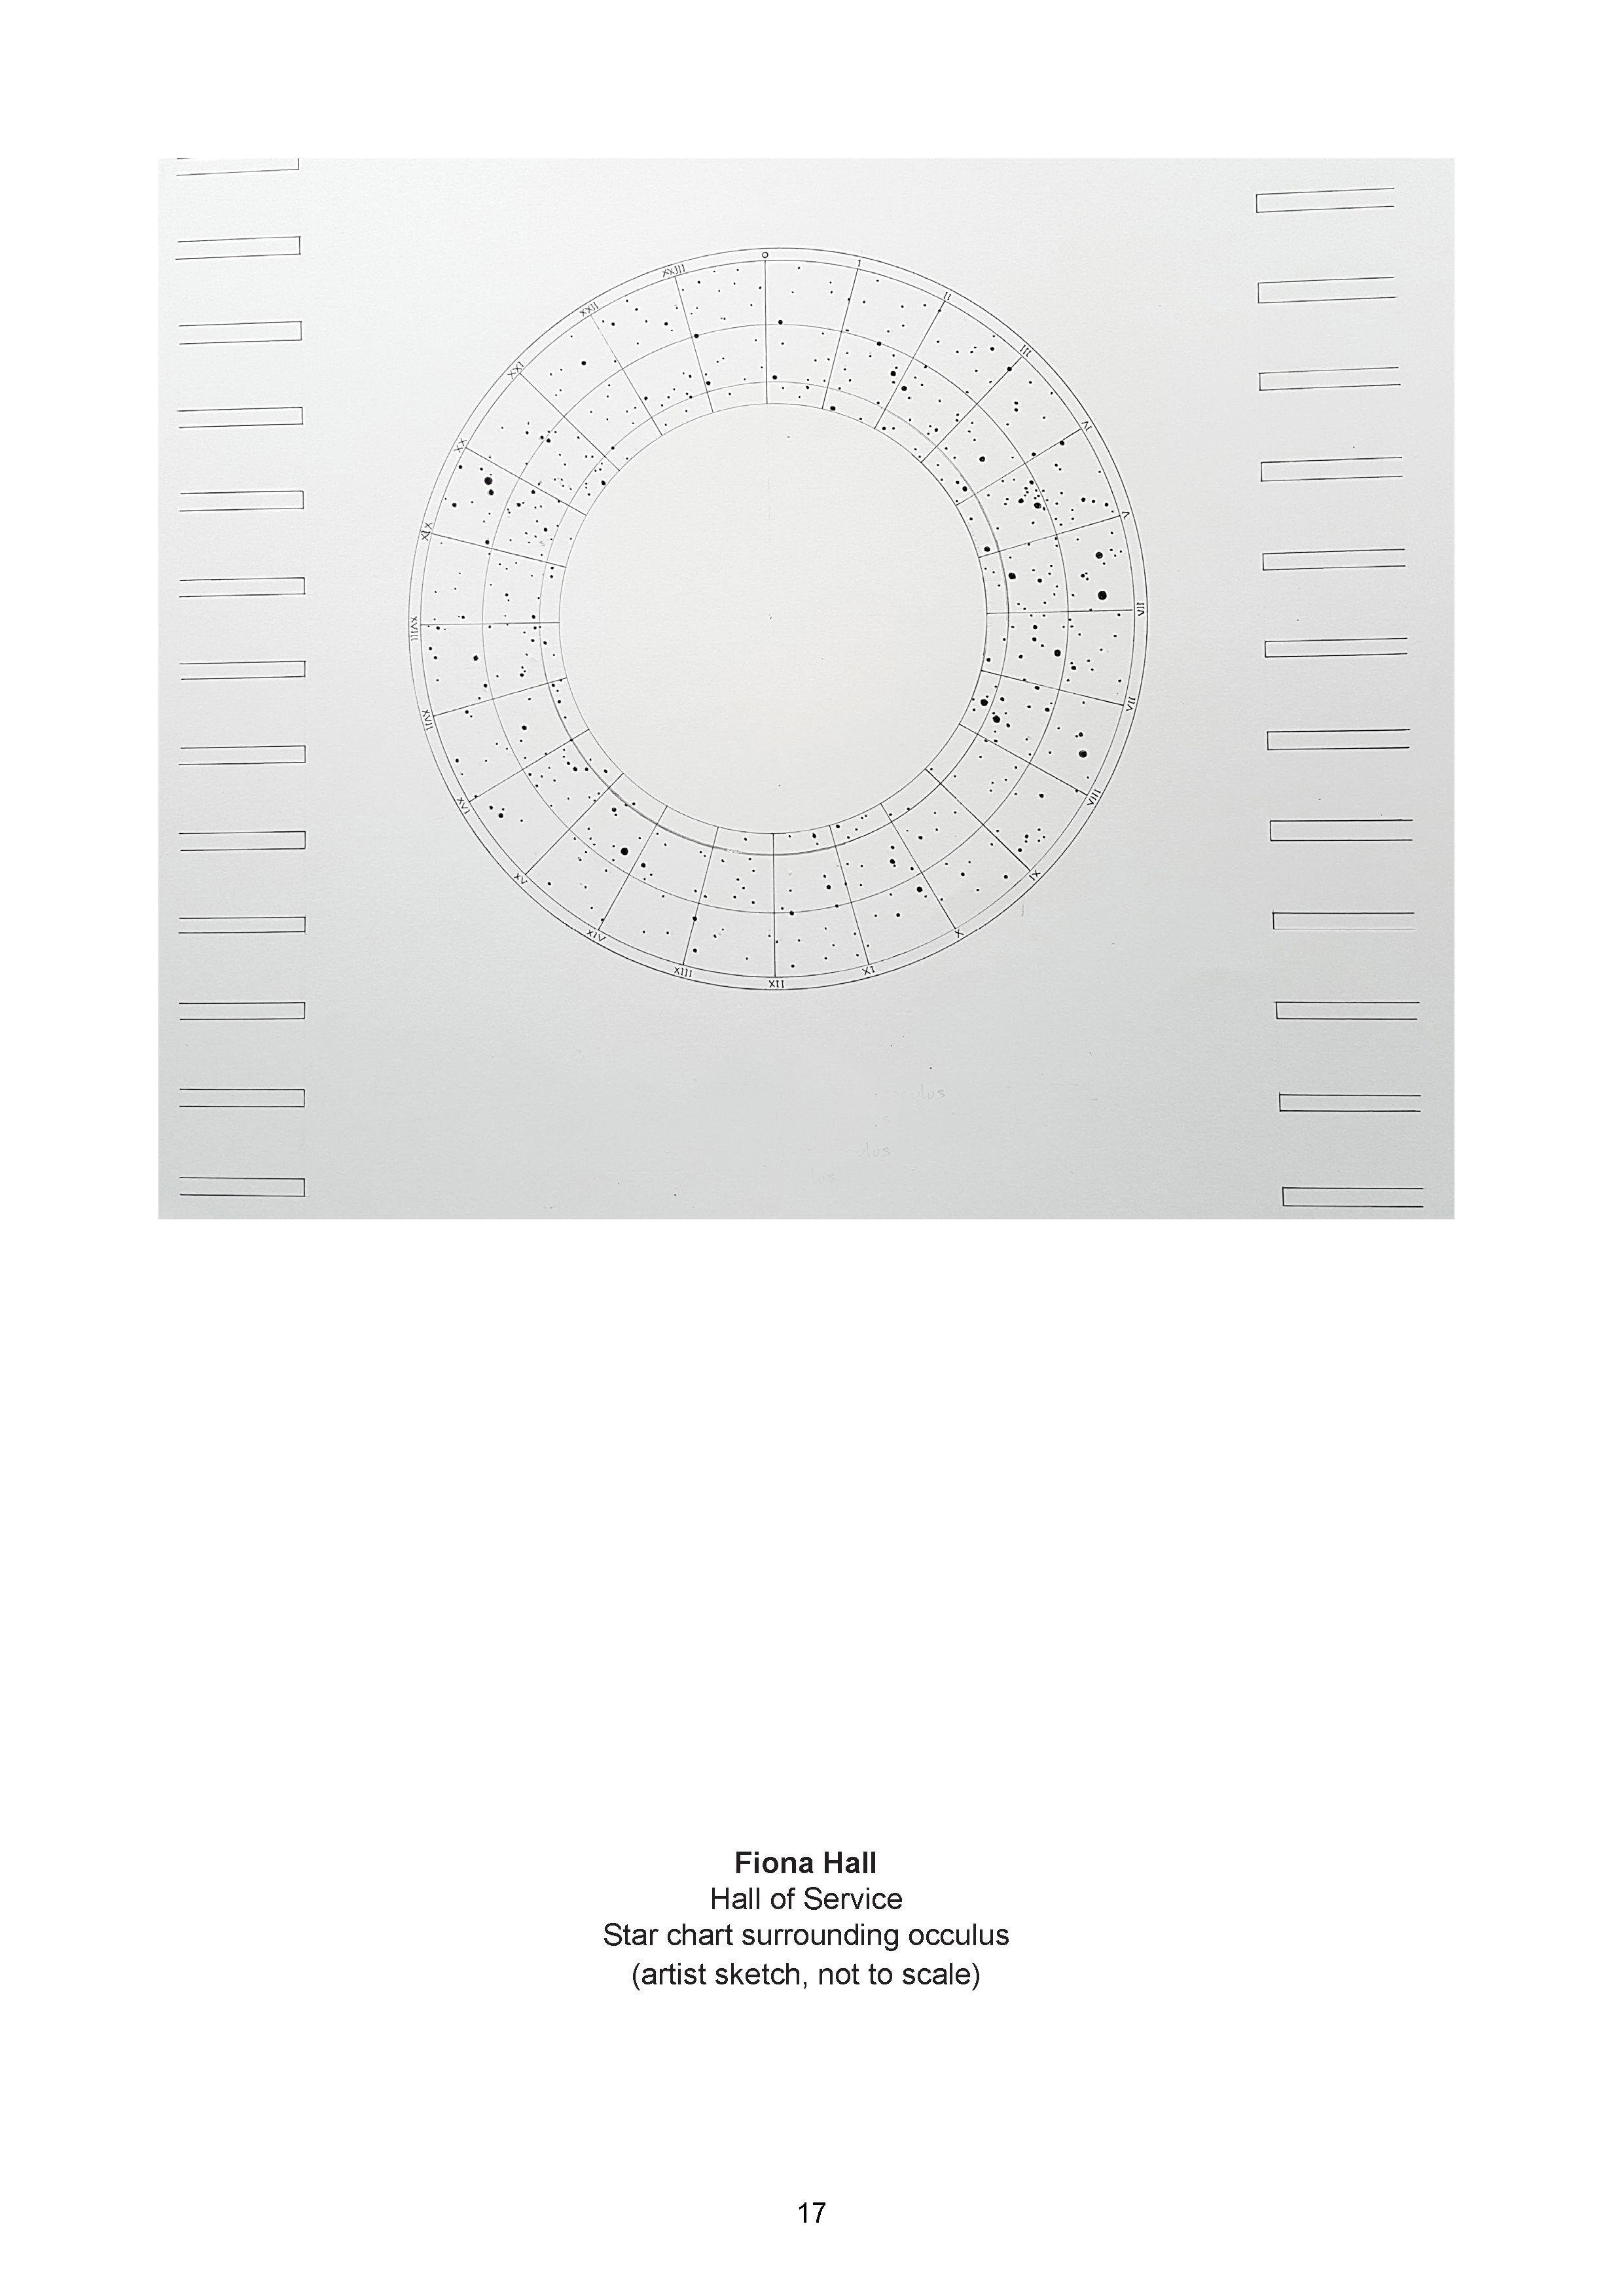 Fiona Hall submission - star chart surrounding oculus